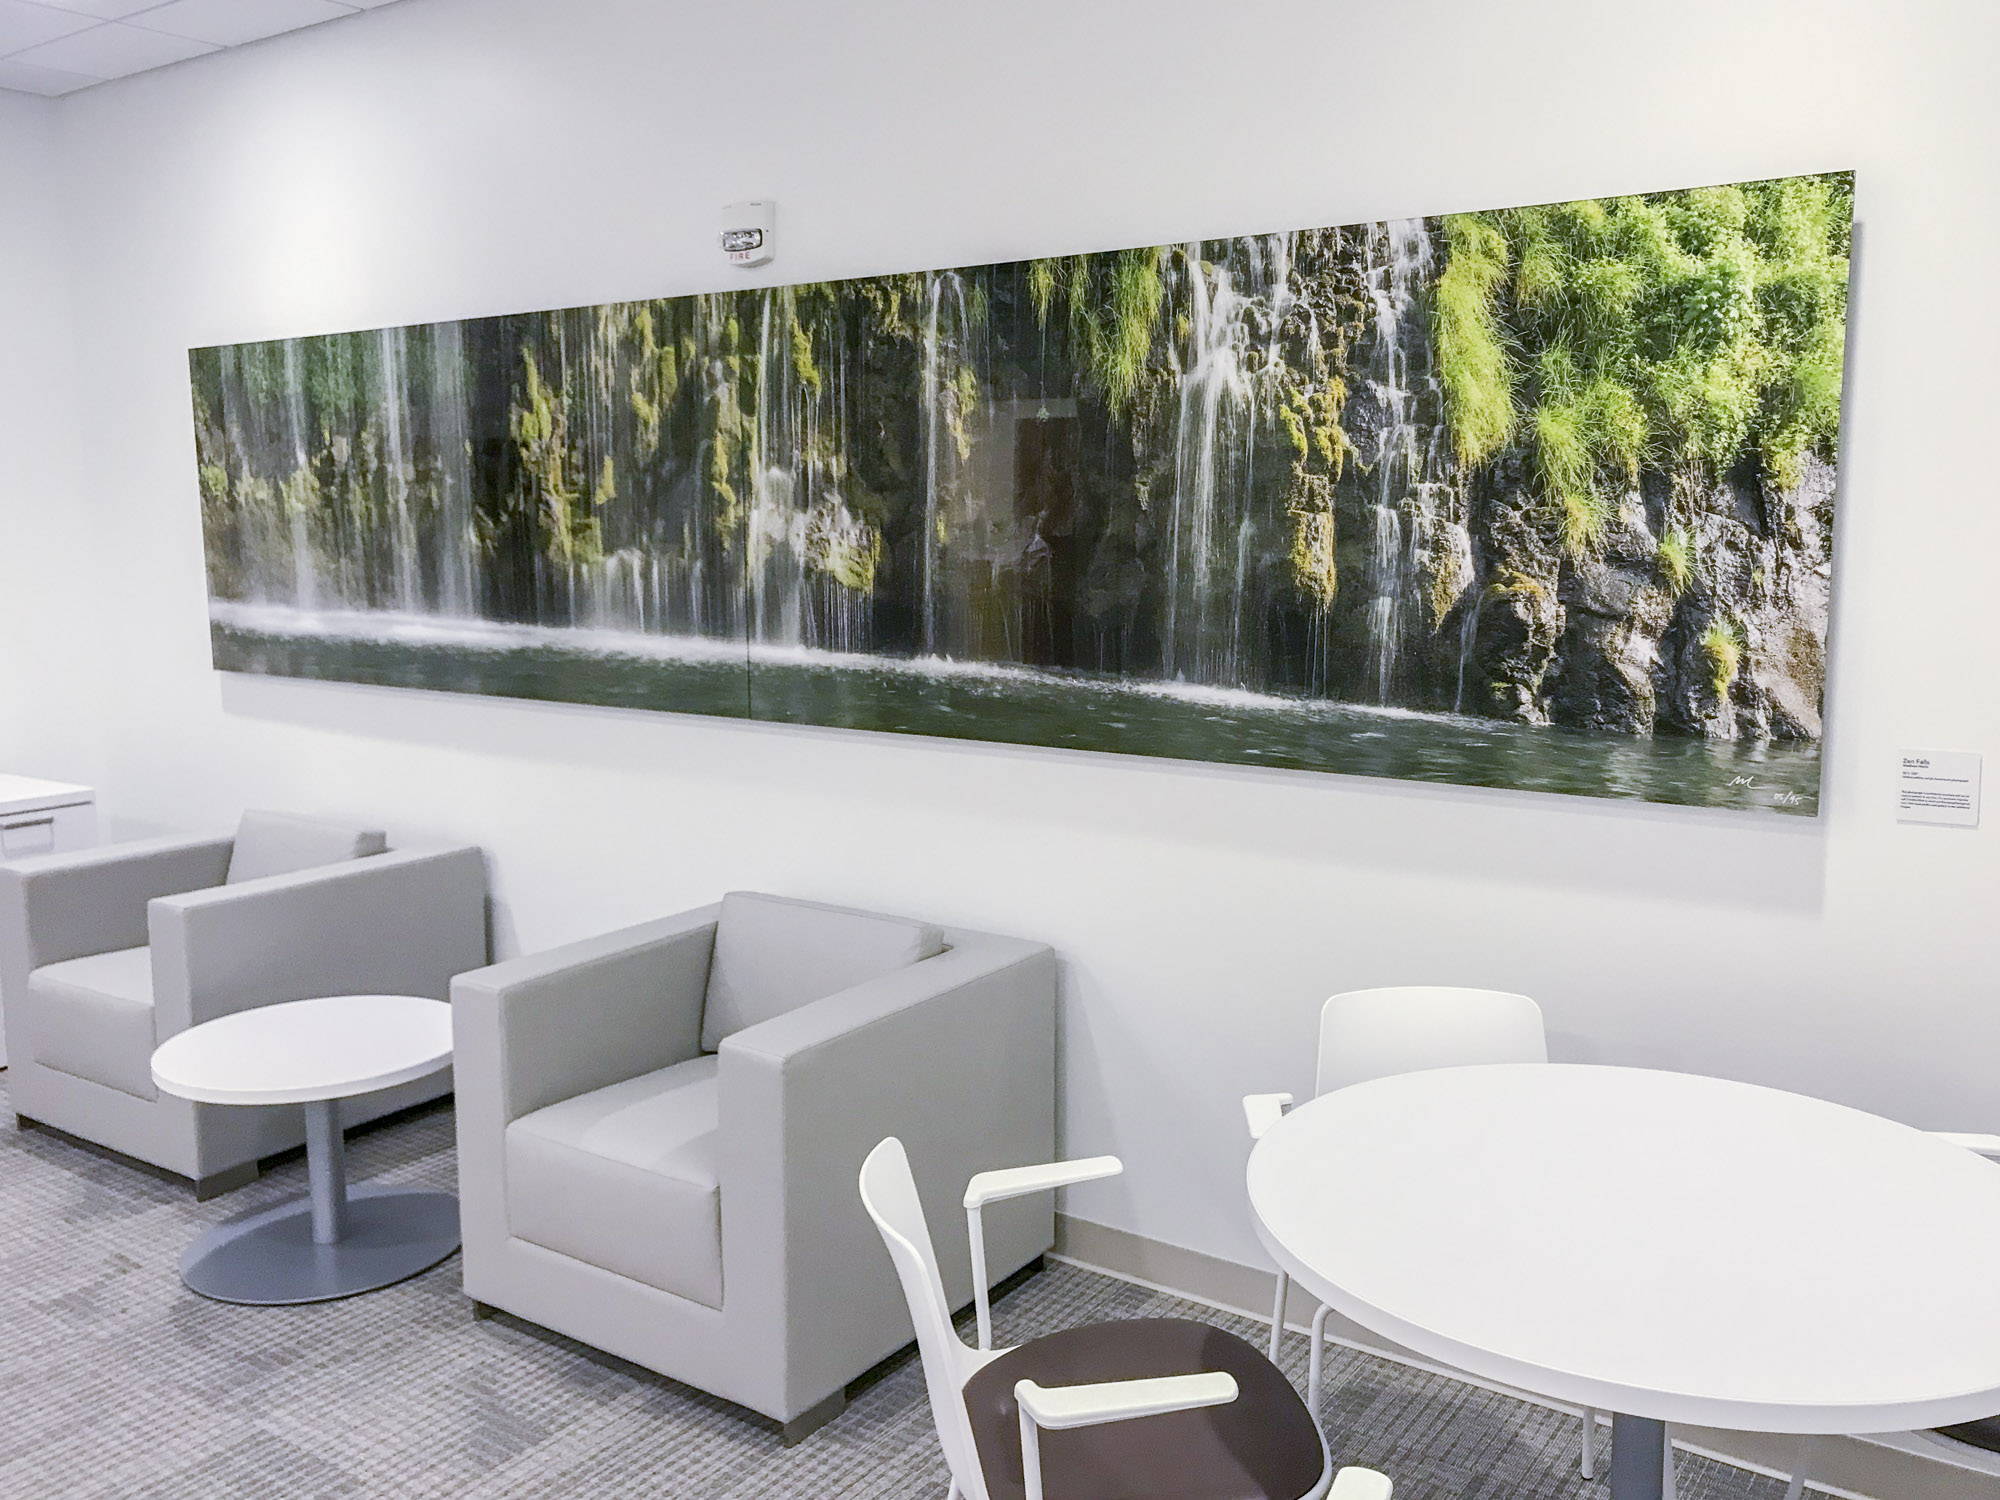 Large format gigapixel photograph in a  doctor's office waiting room